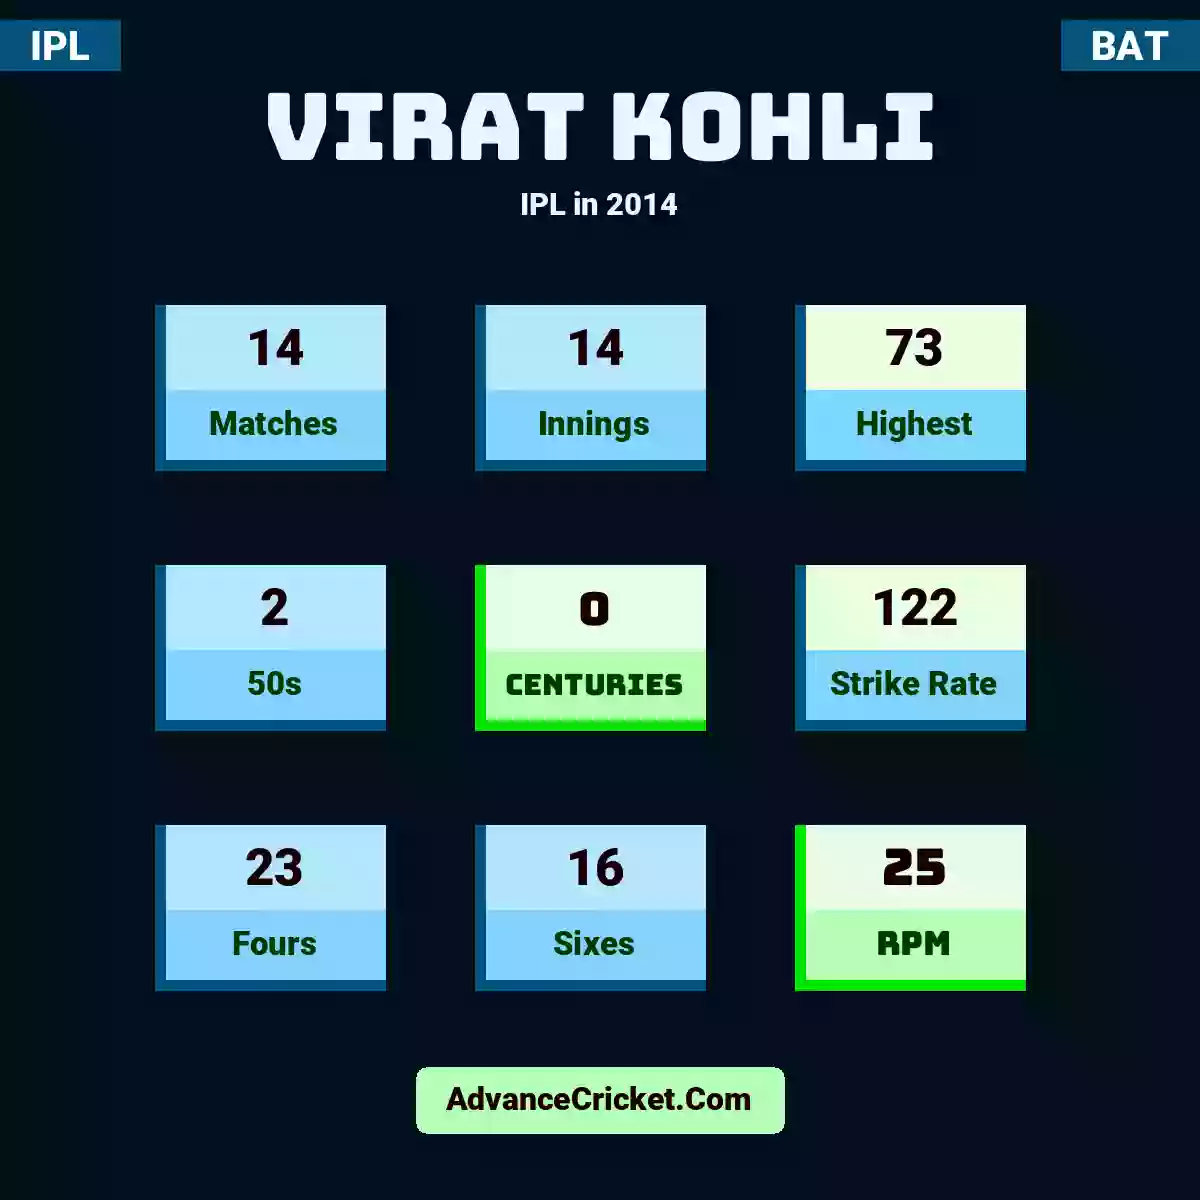 Virat Kohli IPL  in 2014, Virat Kohli played 14 matches, scored 73 runs as highest, 2 half-centuries, and 0 centuries, with a strike rate of 122. V.Kohli hit 23 fours and 16 sixes, with an RPM of 25.